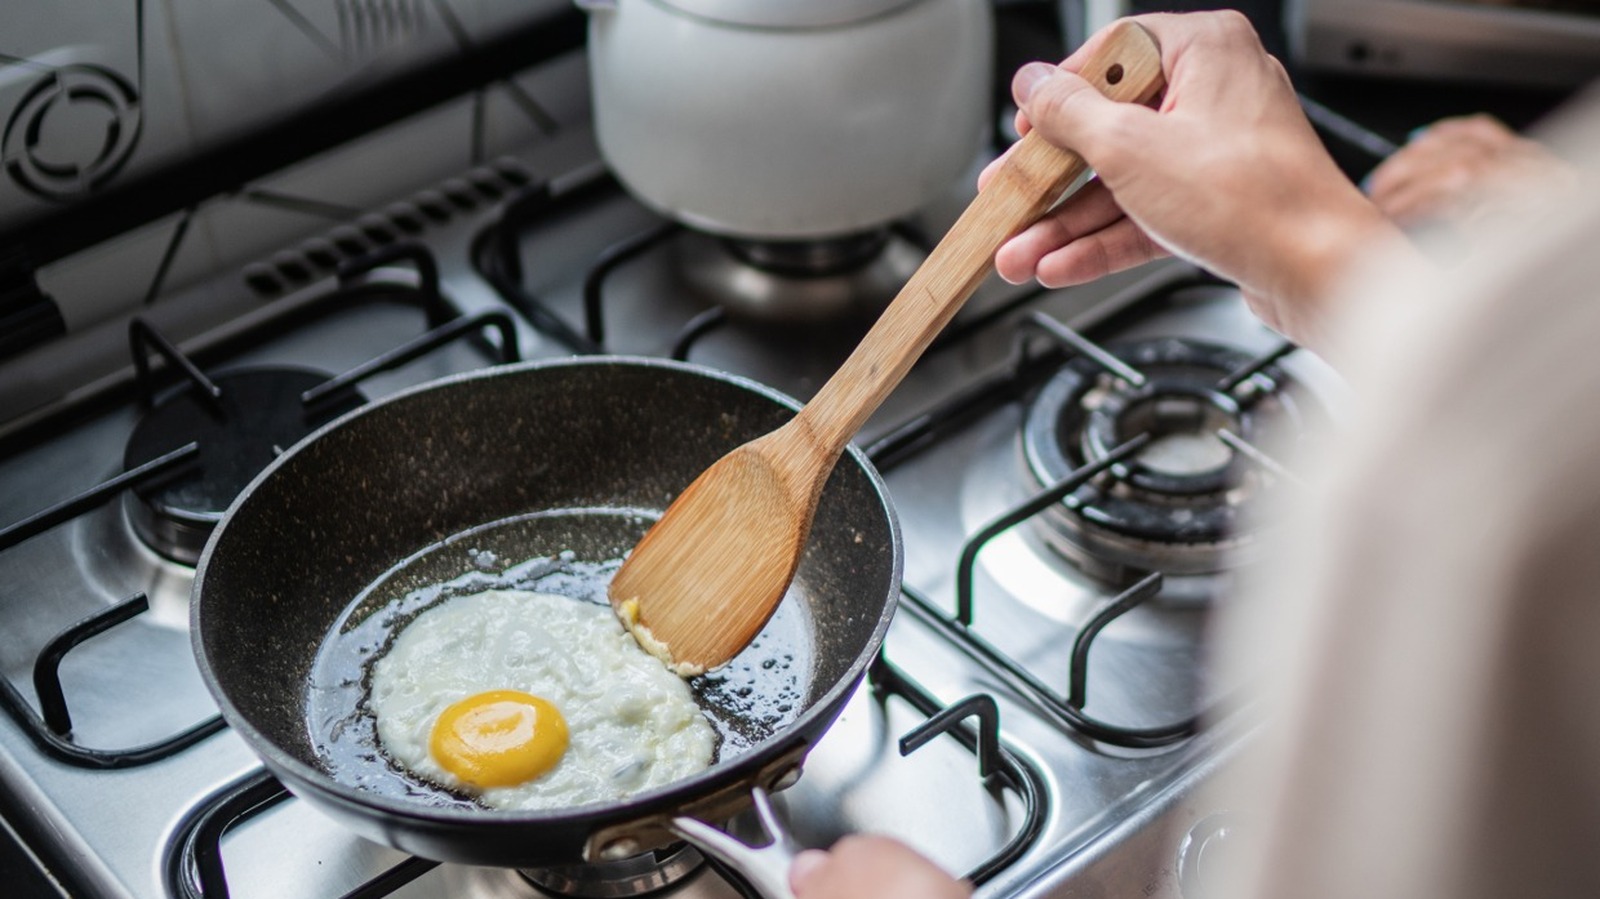 5 Mistakes You Should Never Make with Nonstick Cookware